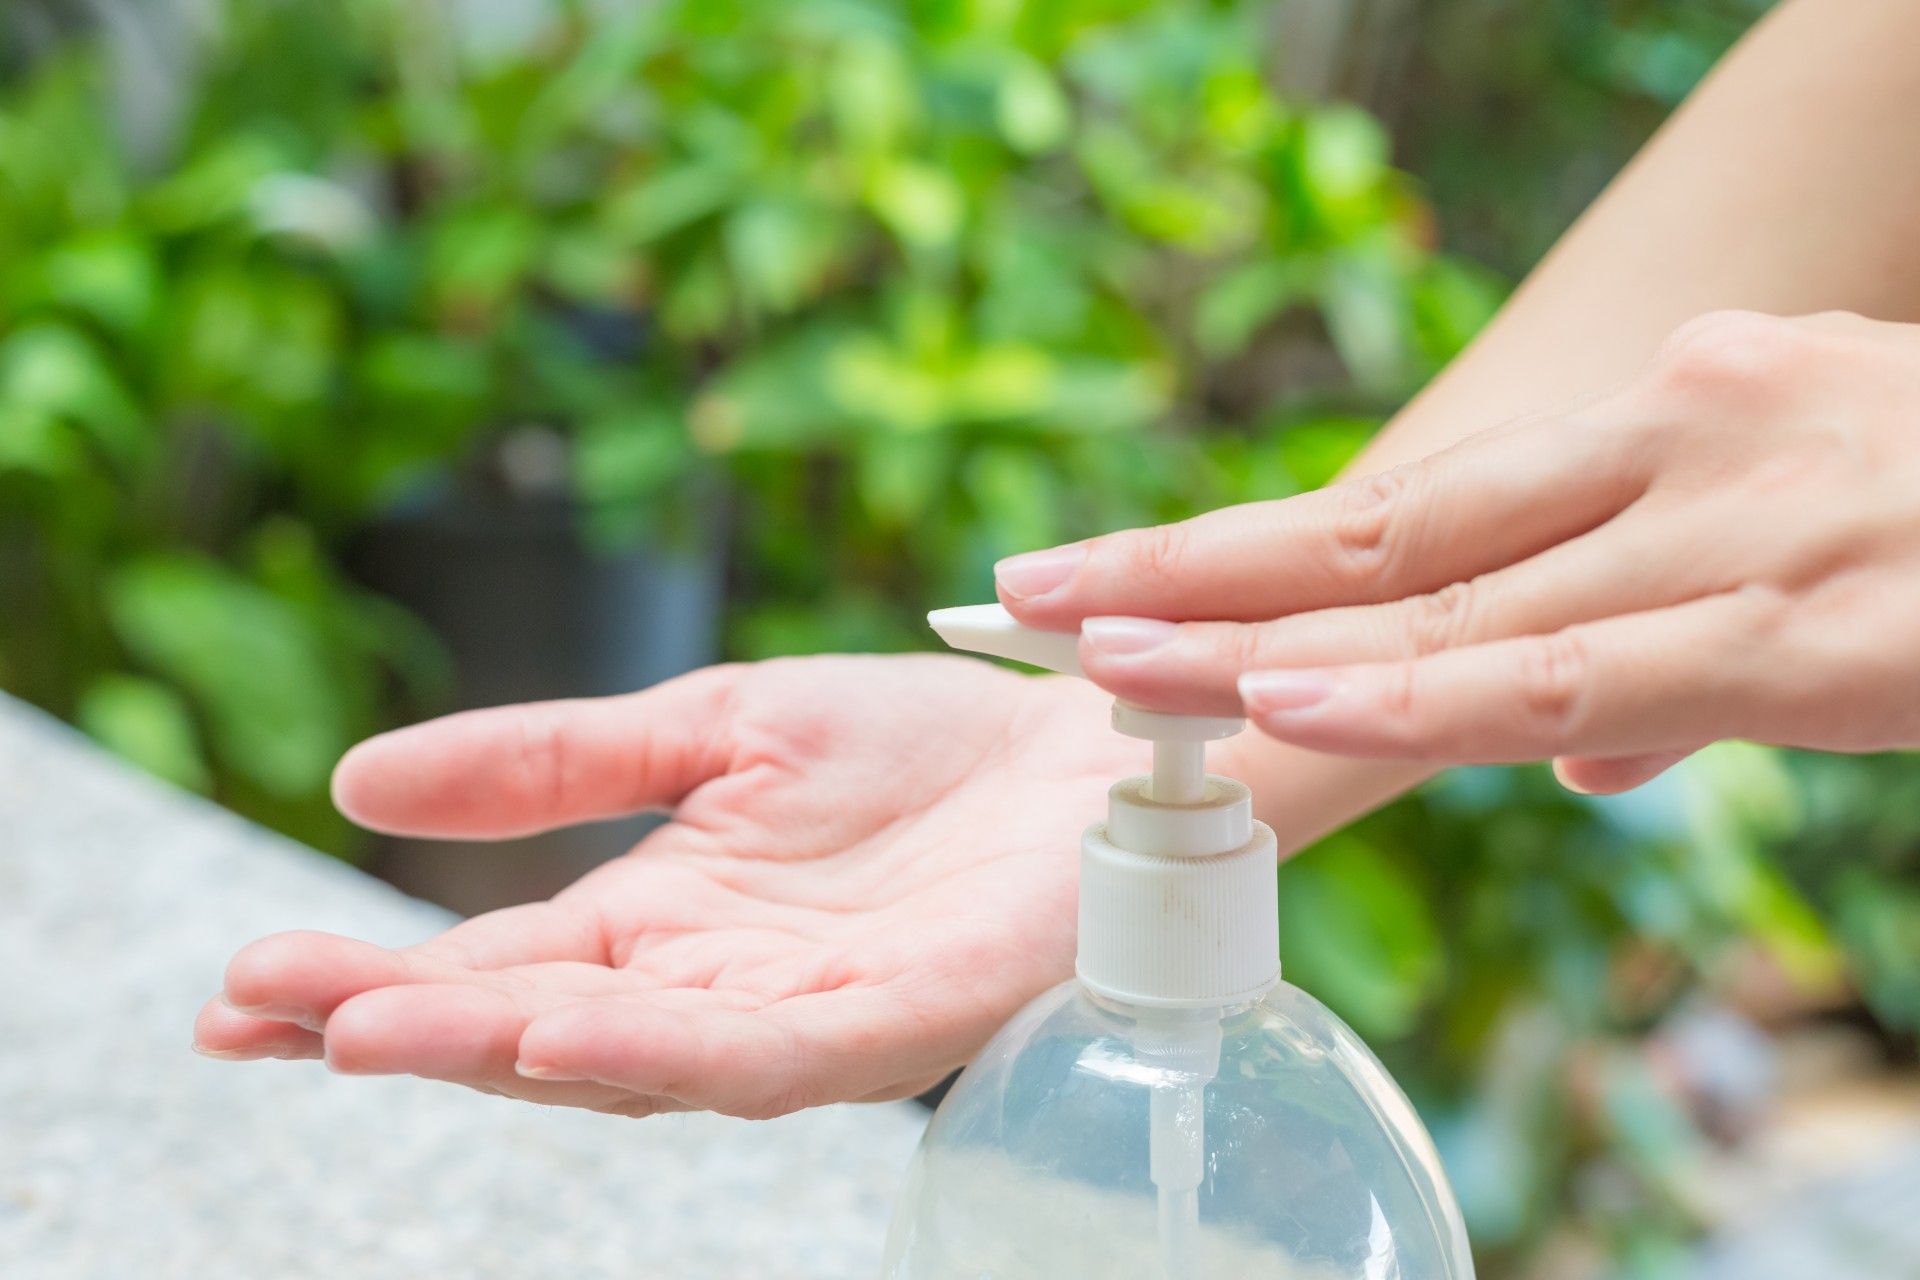 Woman outdoors pumping hand sanitizer into right hand